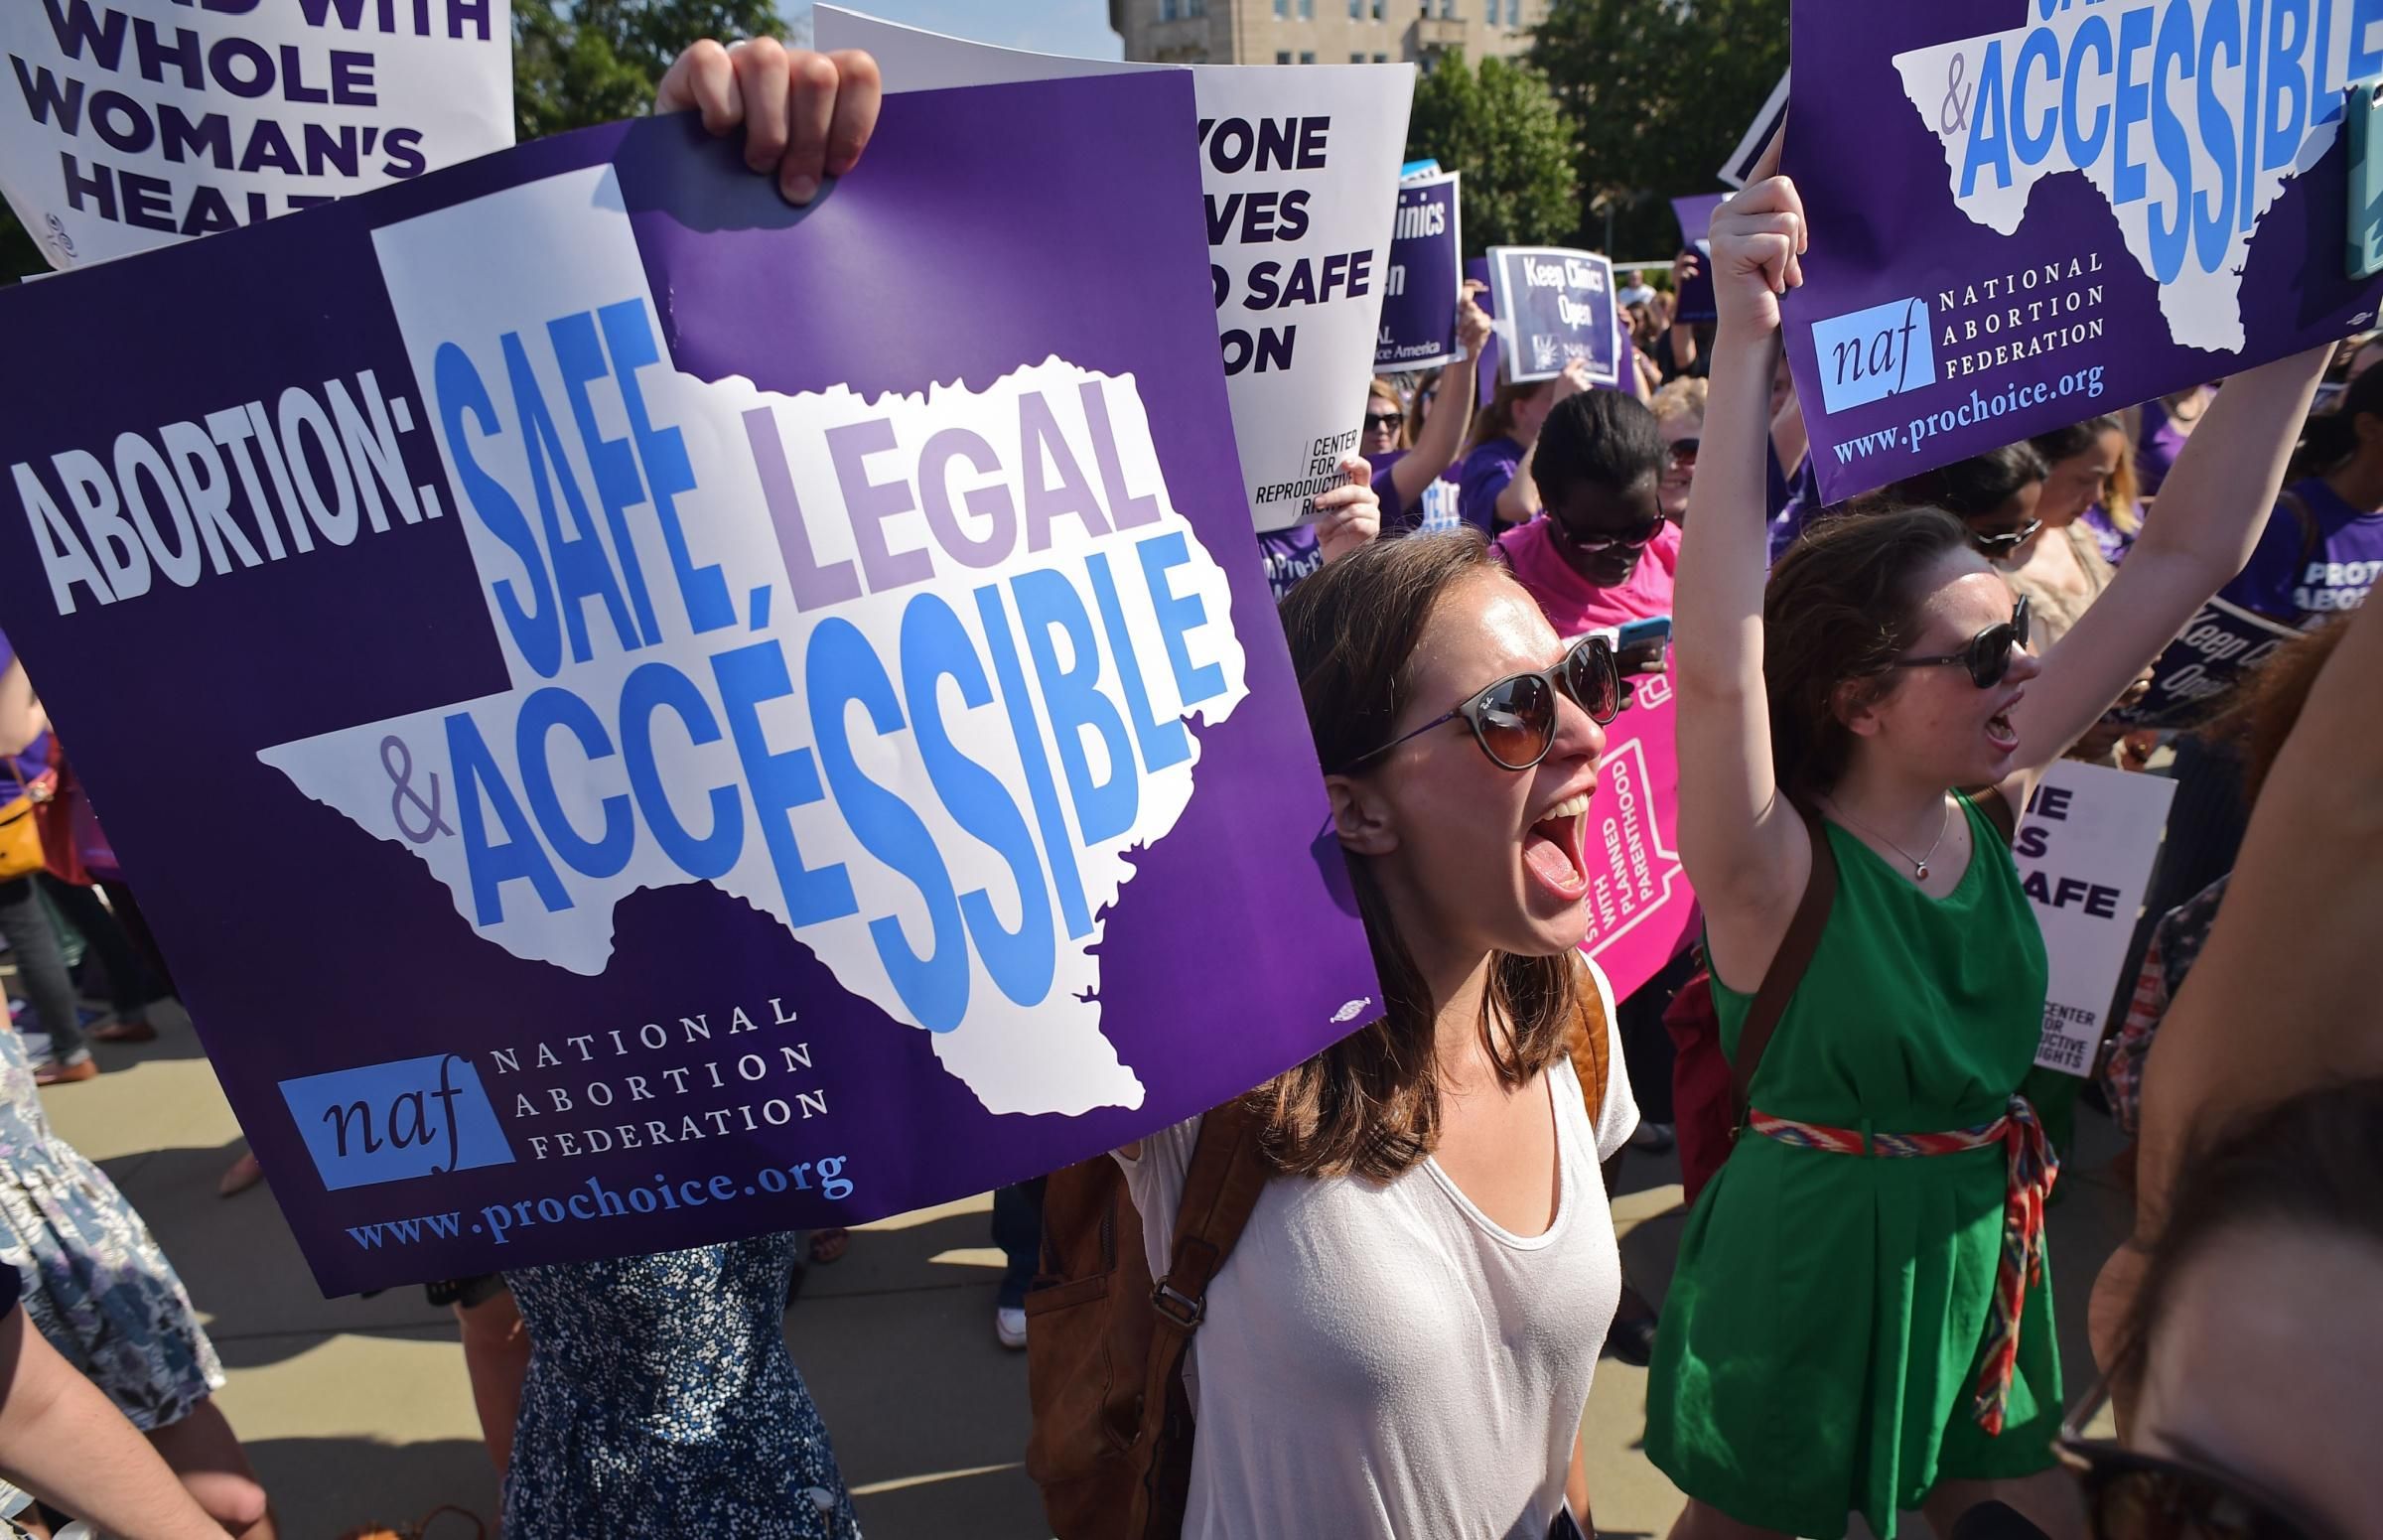 Reproductive rights activists hold placards and chant outside of the U.S. Supreme Court ahead of a ruling on abortion clinic restrictions on June 27, 2016 in Washington, D.C. (Photo: Mandel Ngan/AFP via Getty Images)